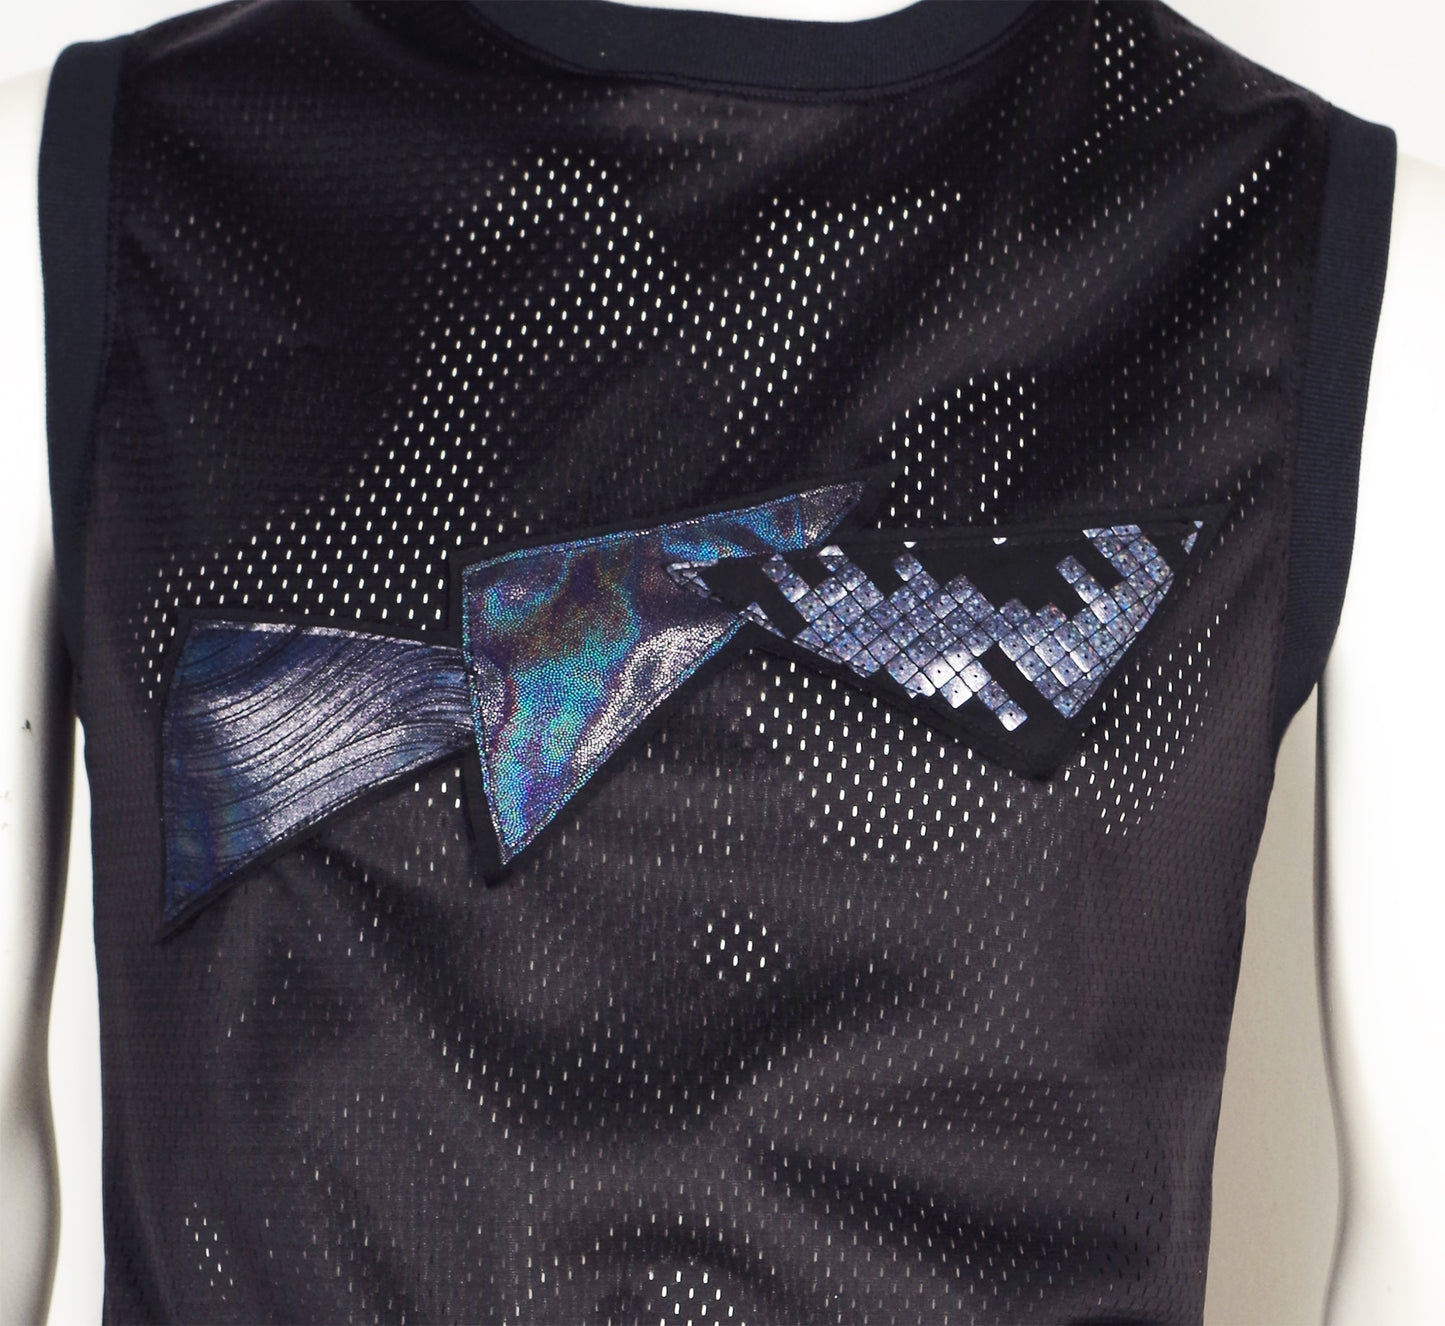 Festival Mesh Top with Holographic Triangles Black